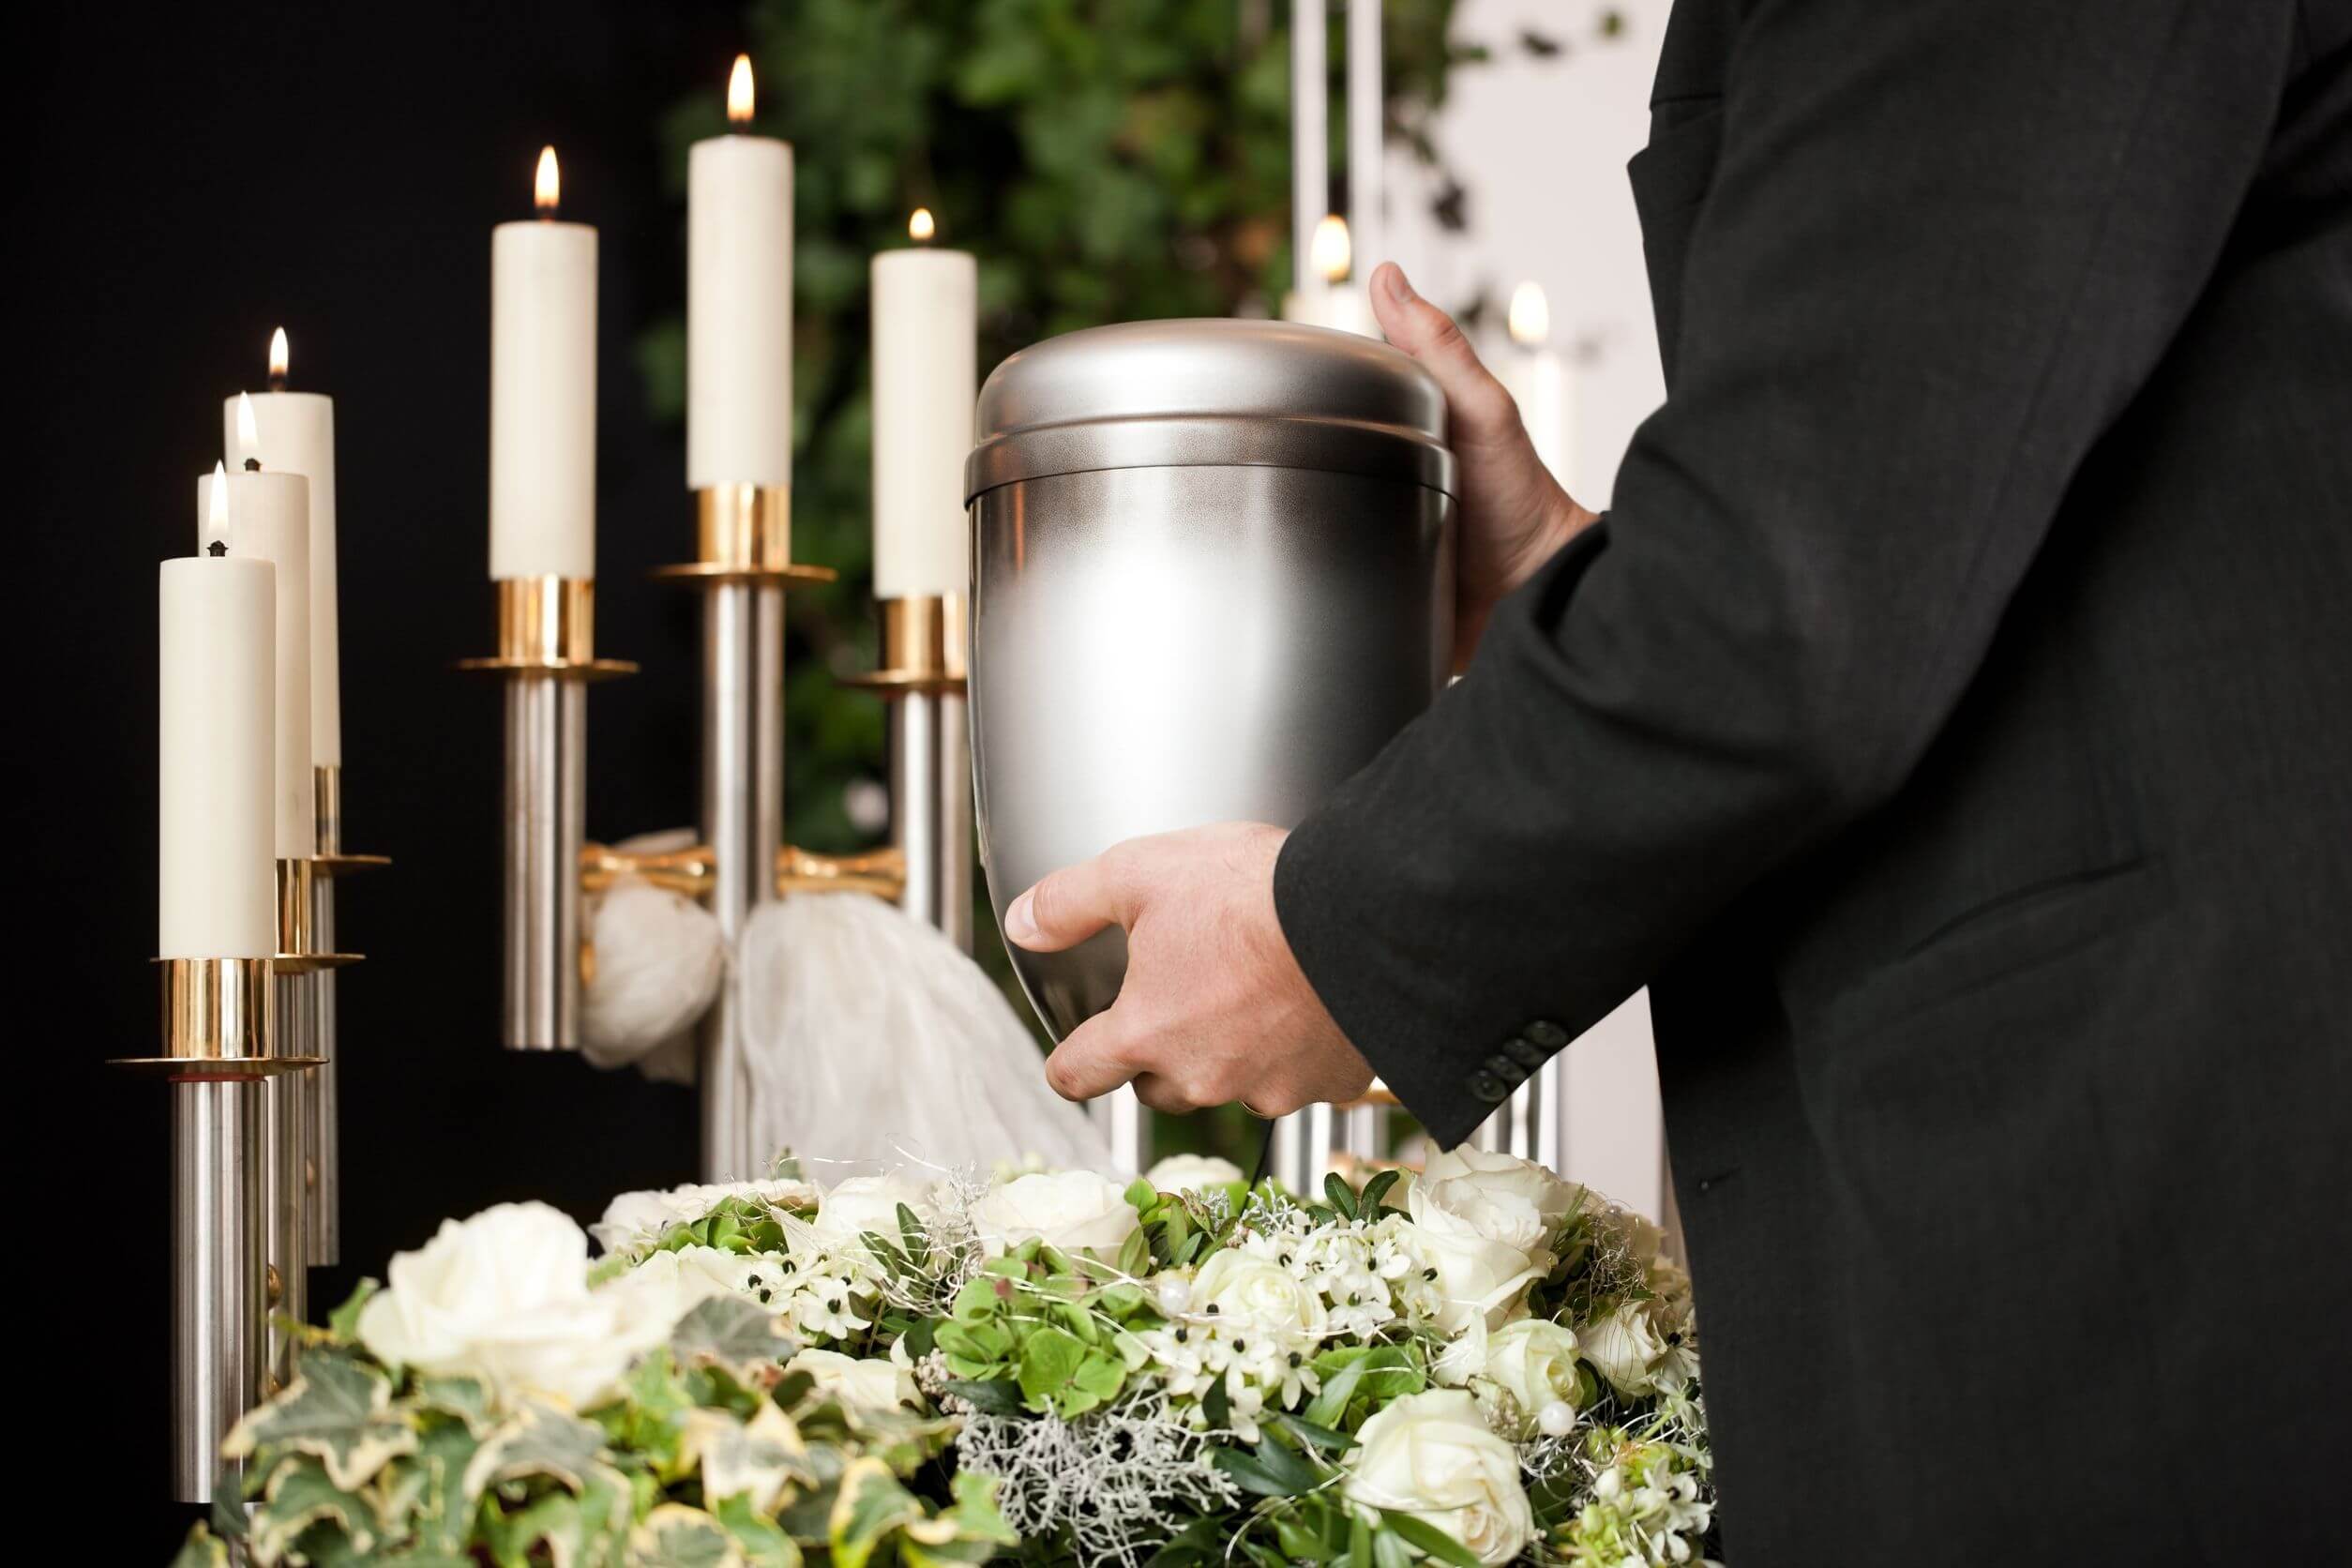 What To Do If The Family Disagrees About Cremation